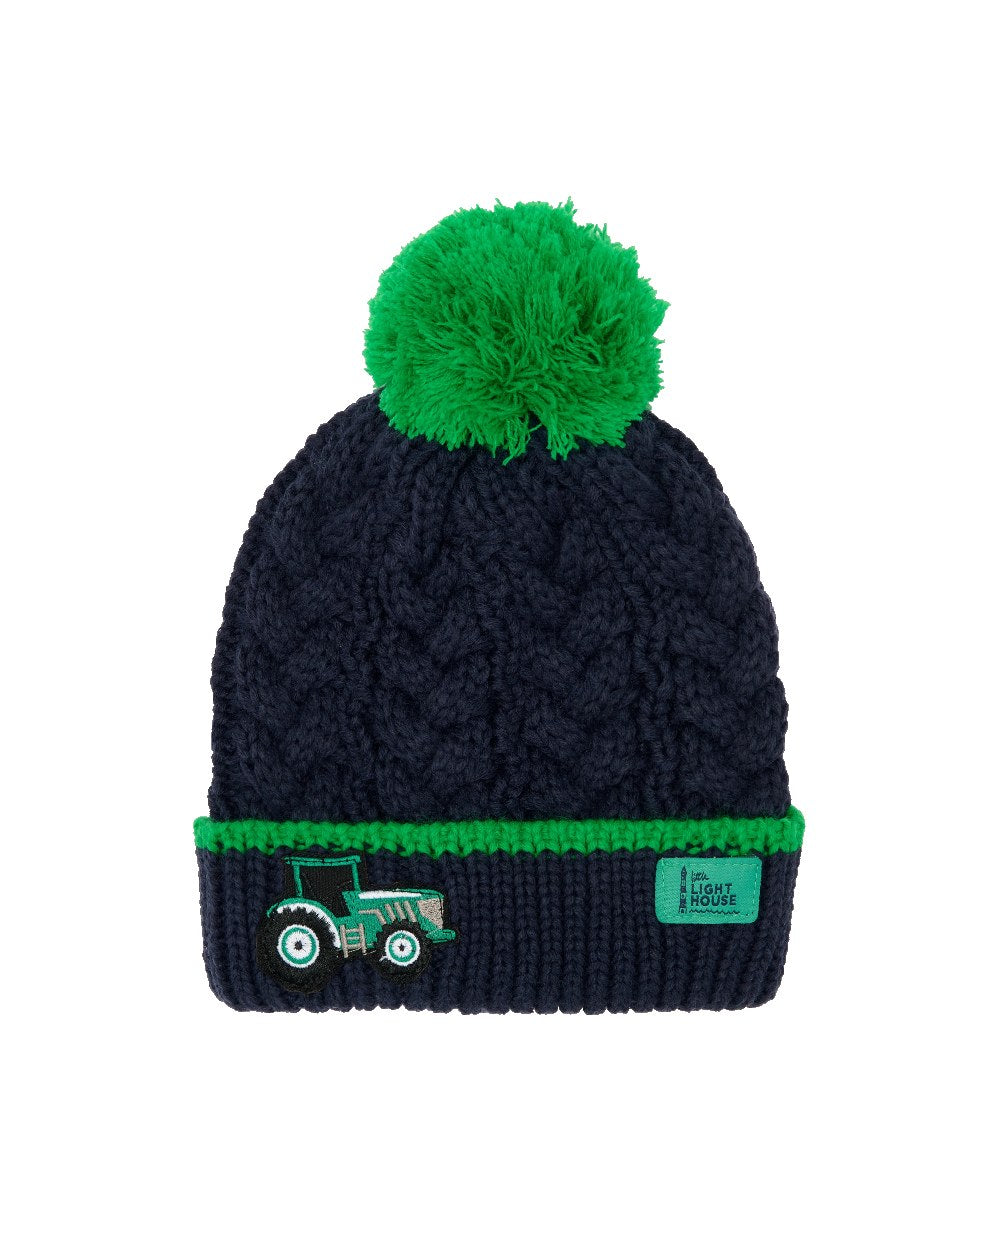 Lighthouse Childrens Bobbie Bobble Hat in Green Tractor 